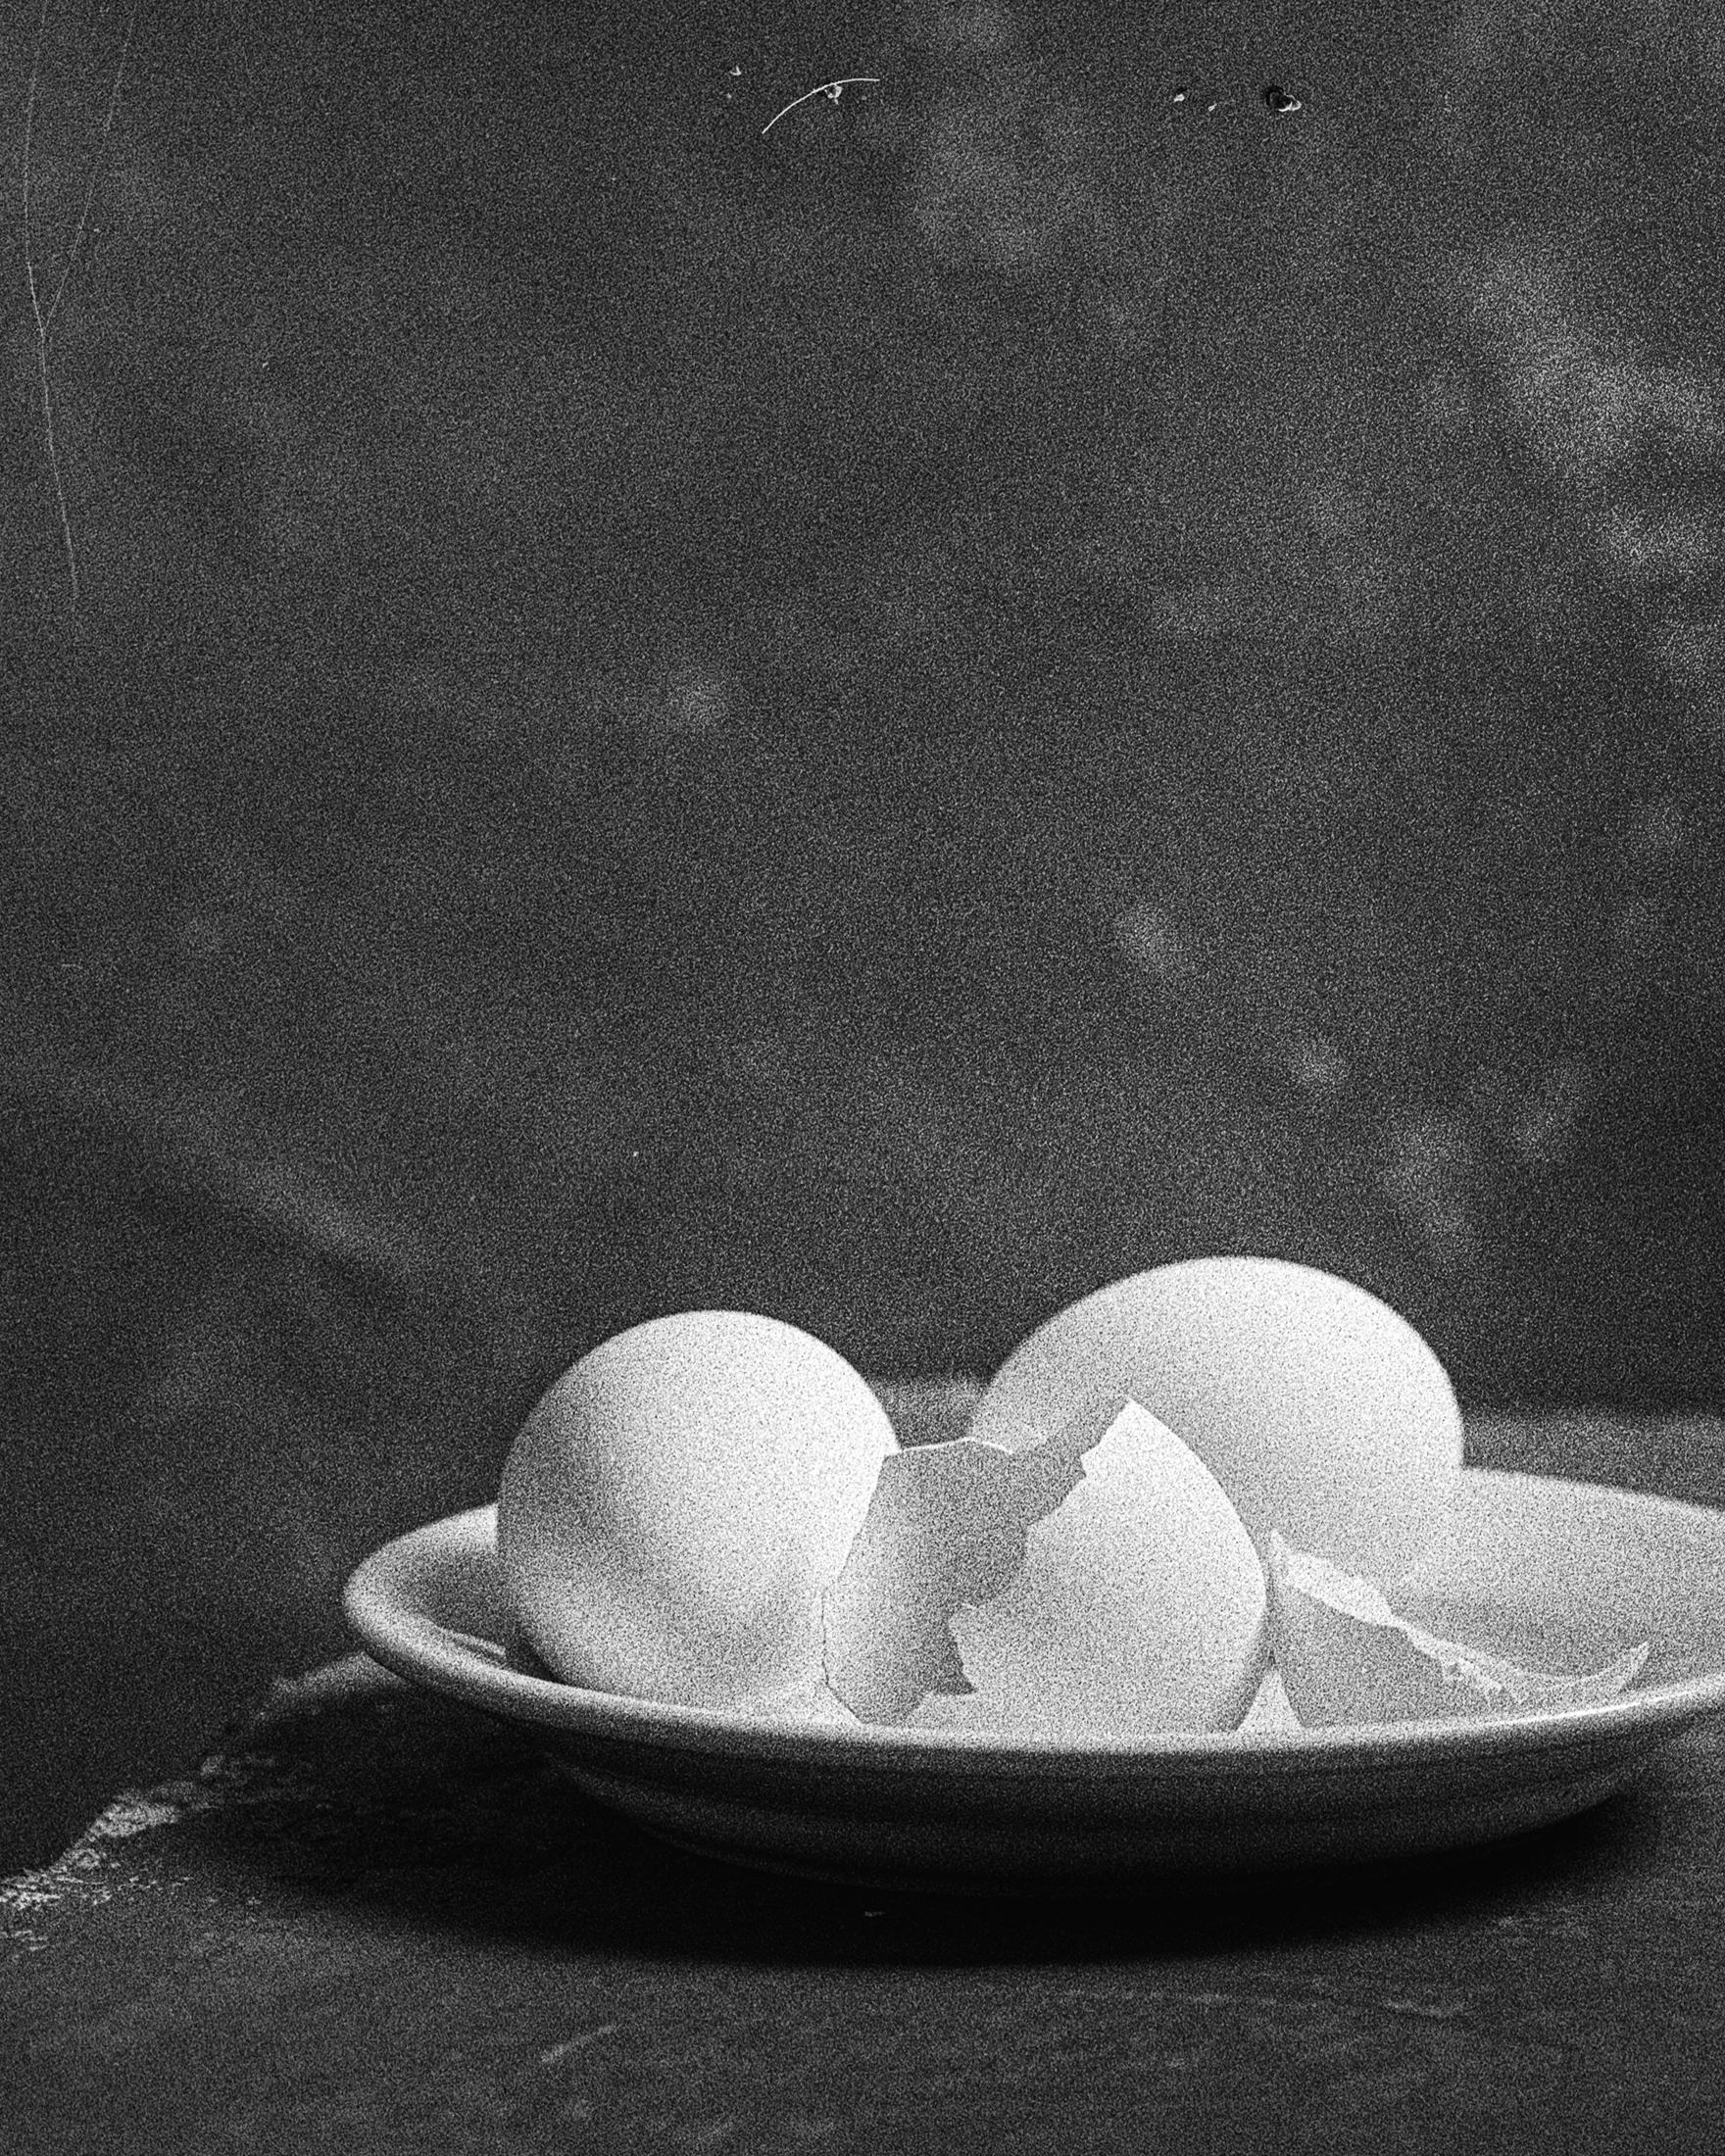 Shine Huang Abstract Photograph - Egg Study 5. Still Life . Black and White Silver Gelatin Print